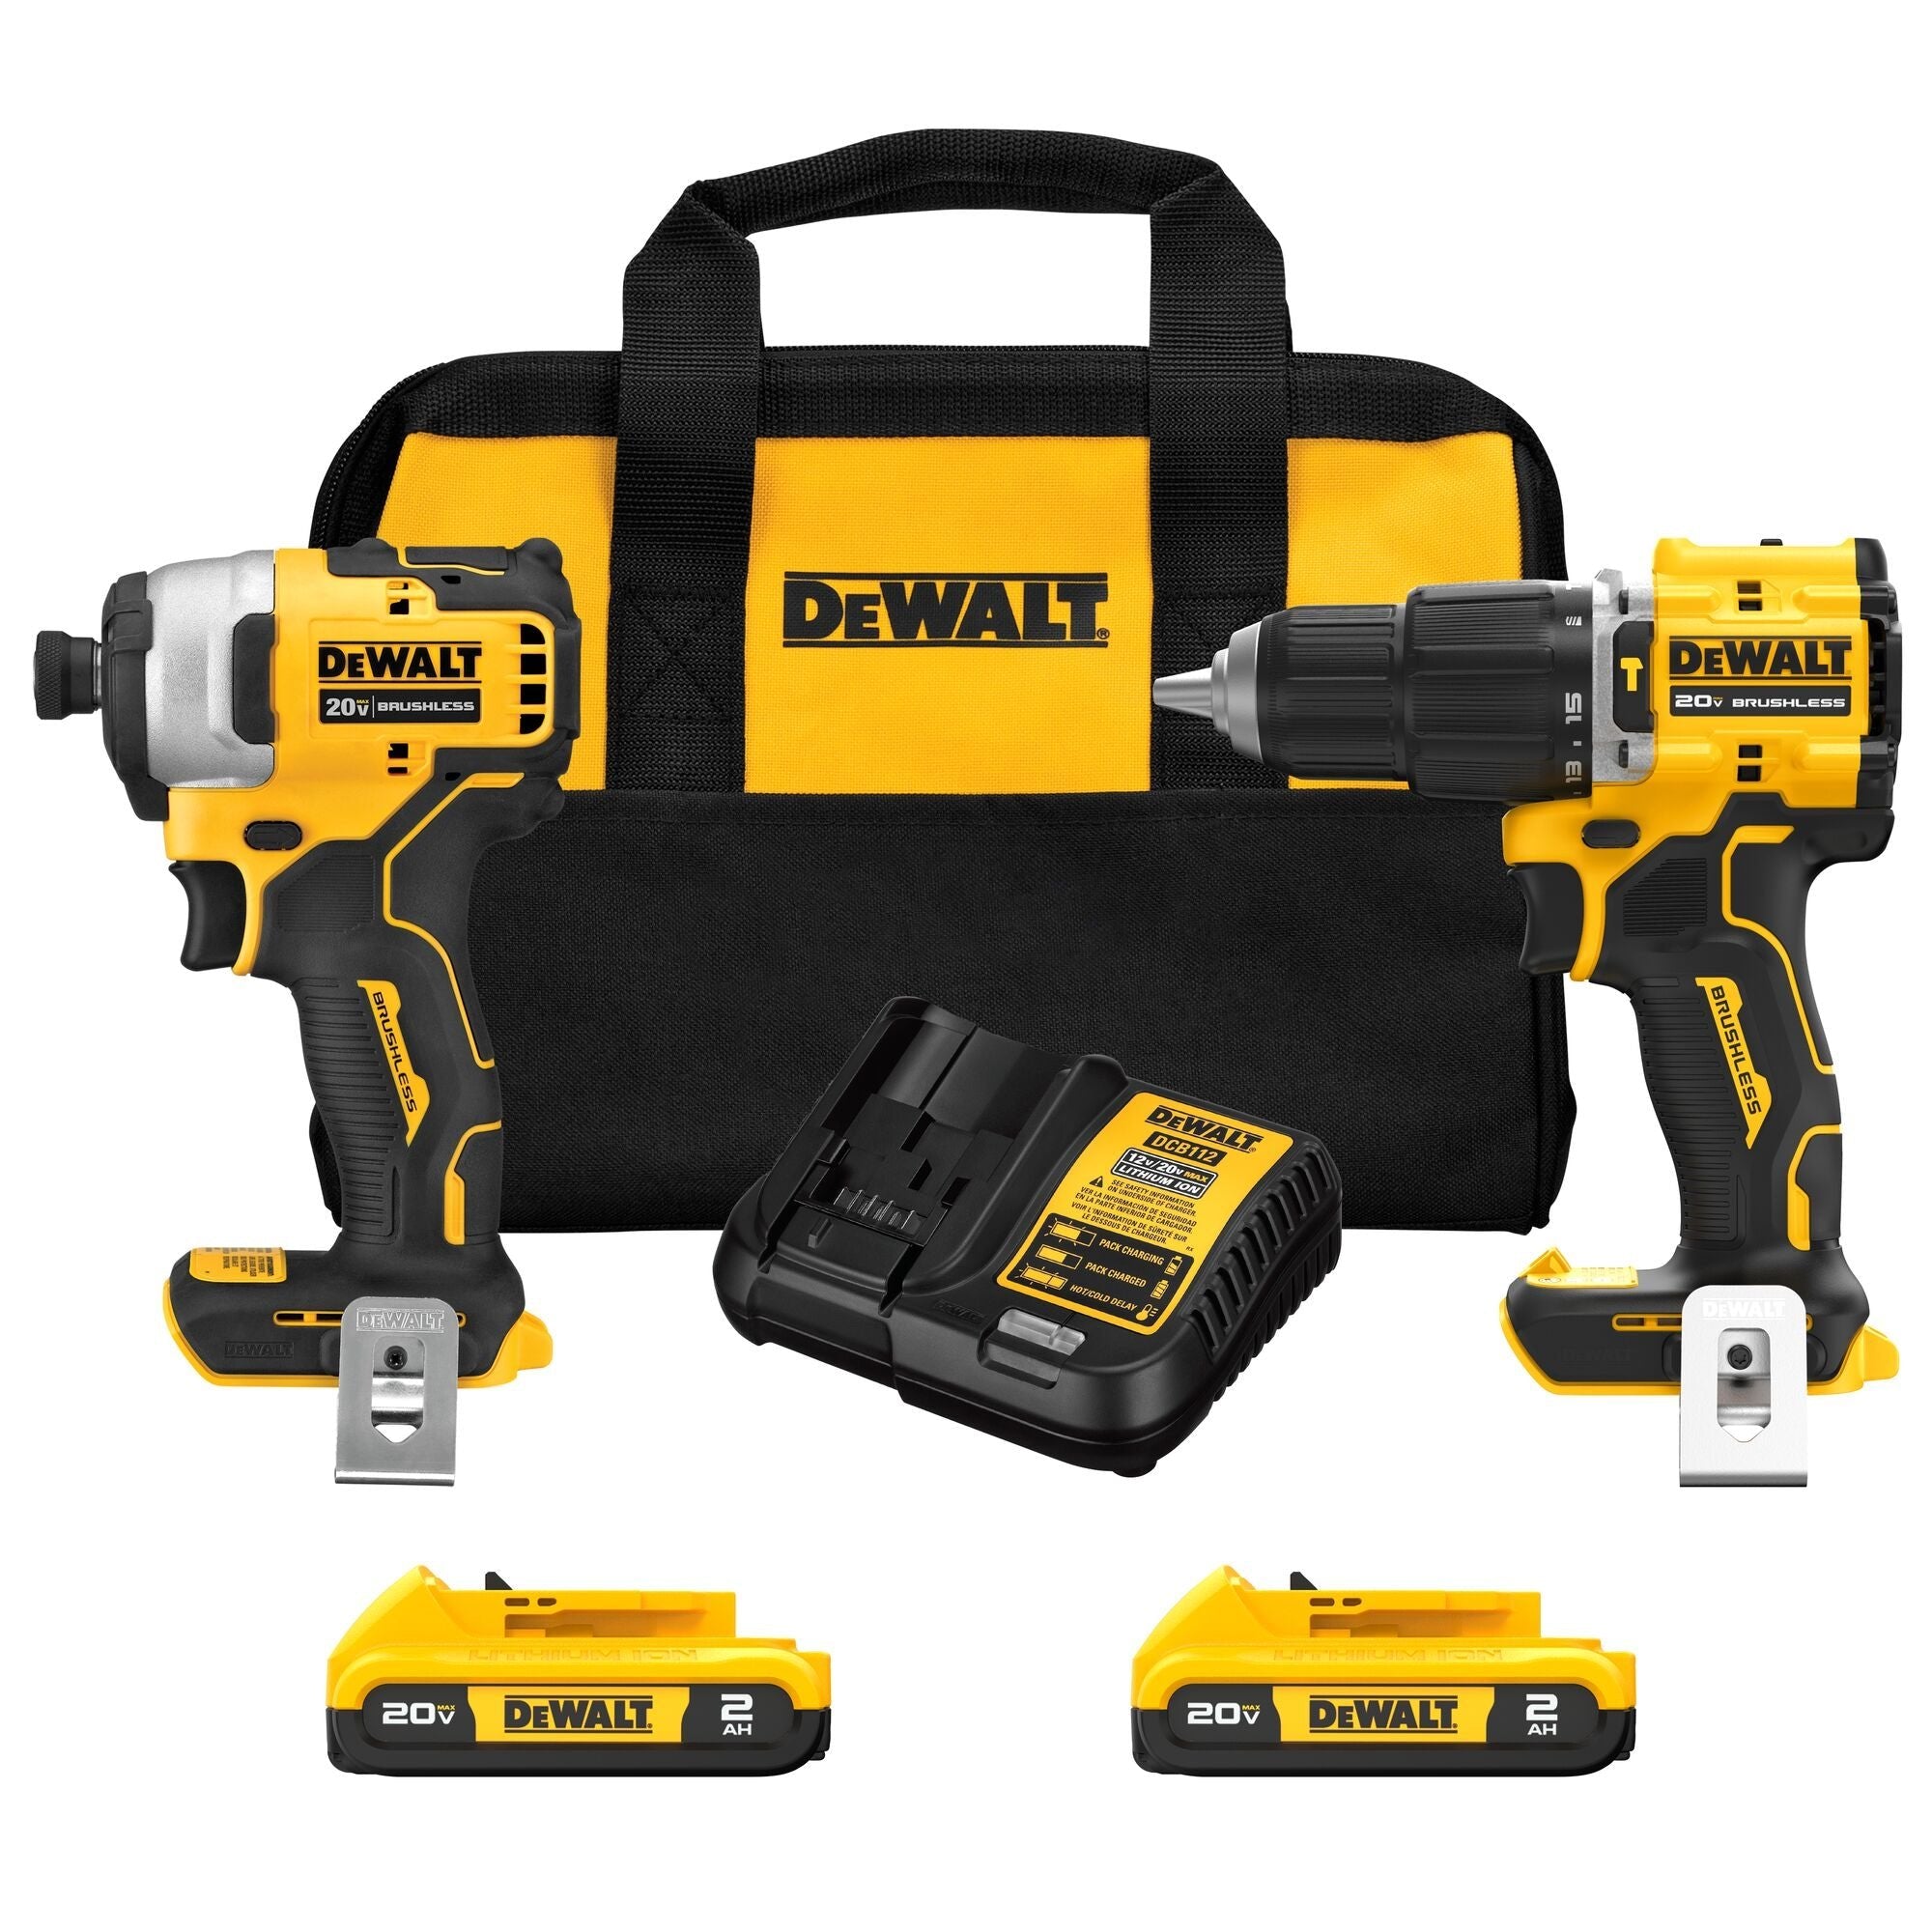 Dewalt 20V MAX ATOMIC Lithium-Ion Compact 1/2-inch Hammer Drill and Impact Driver Combo Kit (2-Tool)